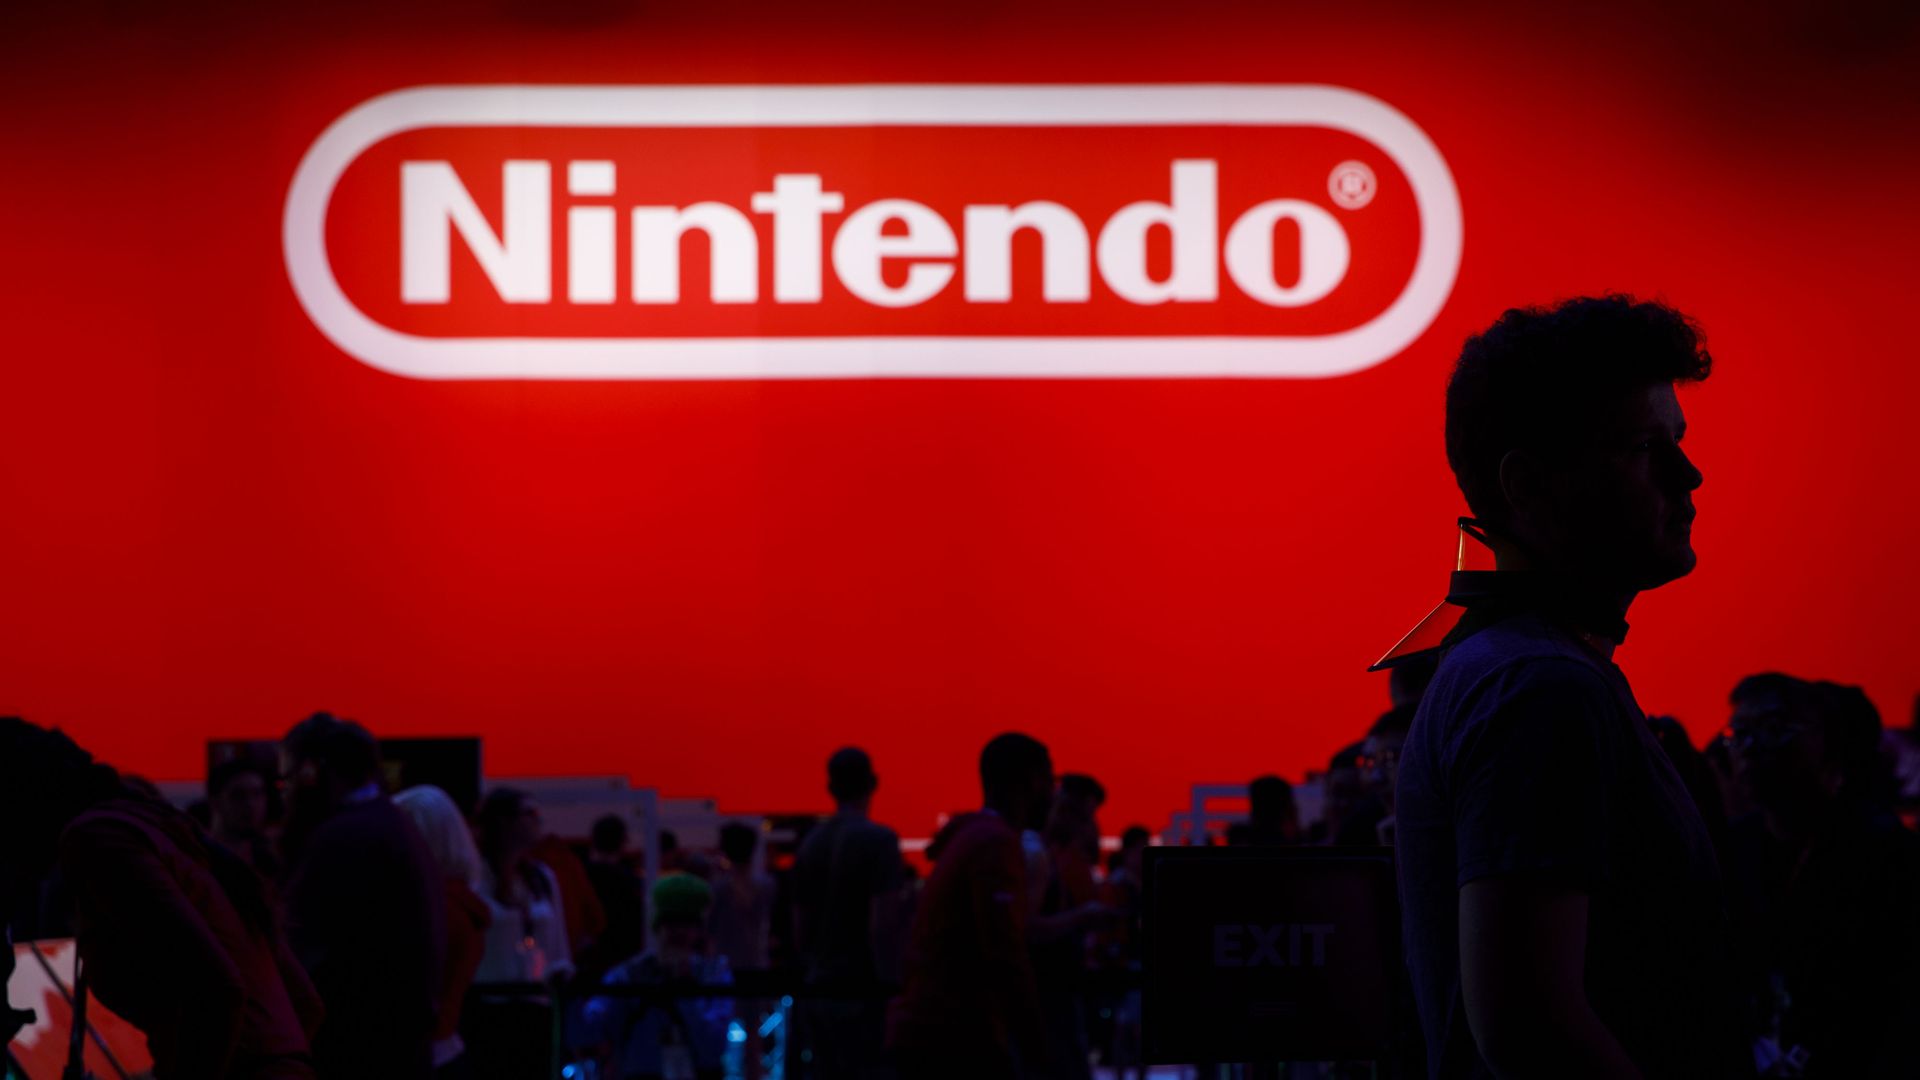 Photo of Nintendo's logo on a big red wall with people walking in front of it